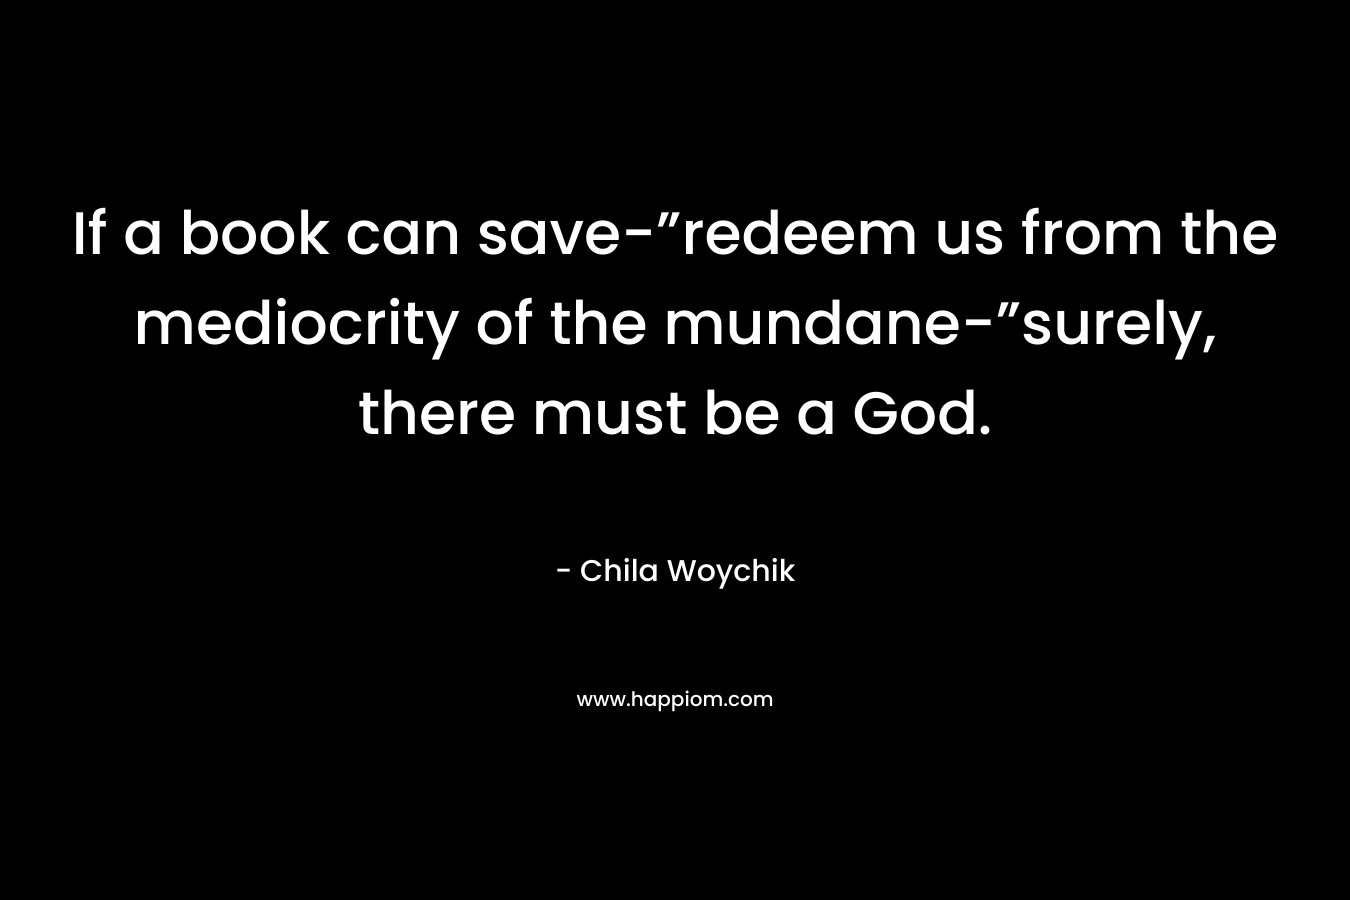 If a book can save-”redeem us from the mediocrity of the mundane-”surely, there must be a God. – Chila Woychik